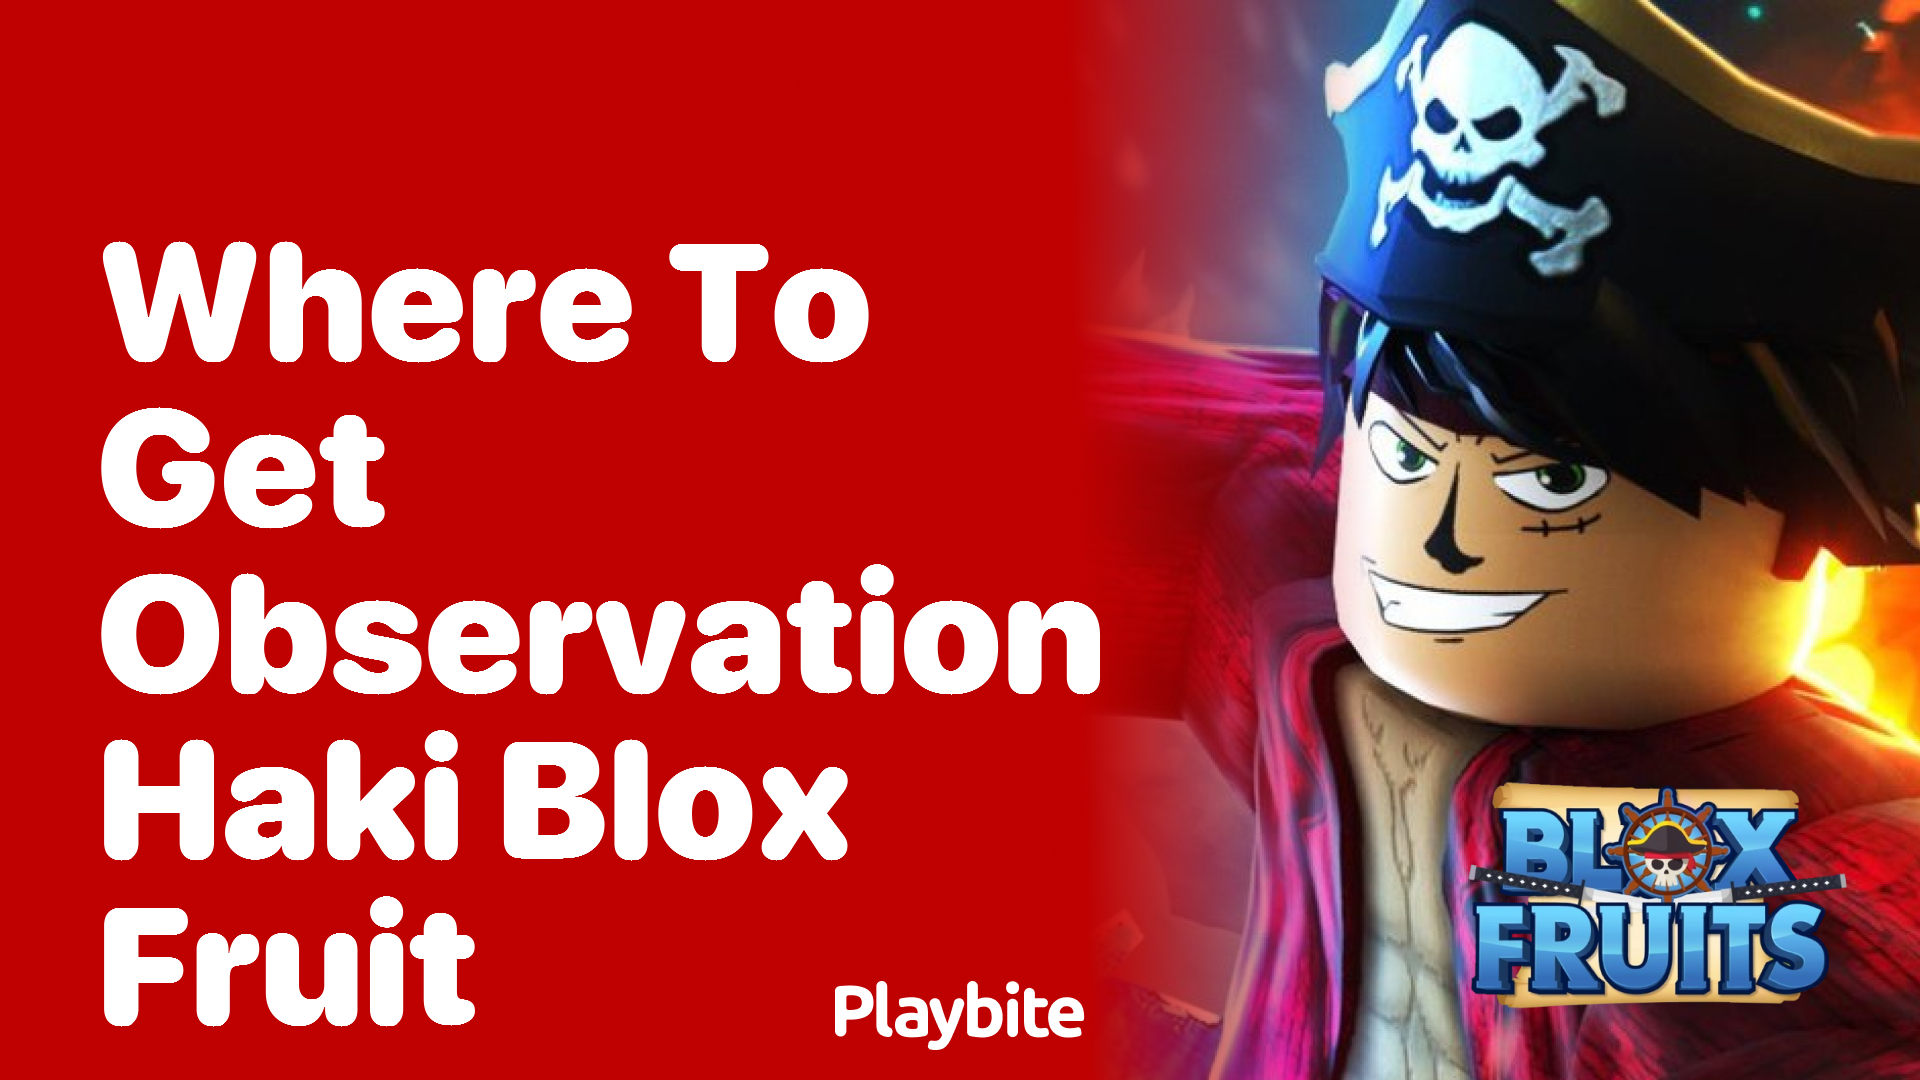 Where to Get Observation Haki in Blox Fruit